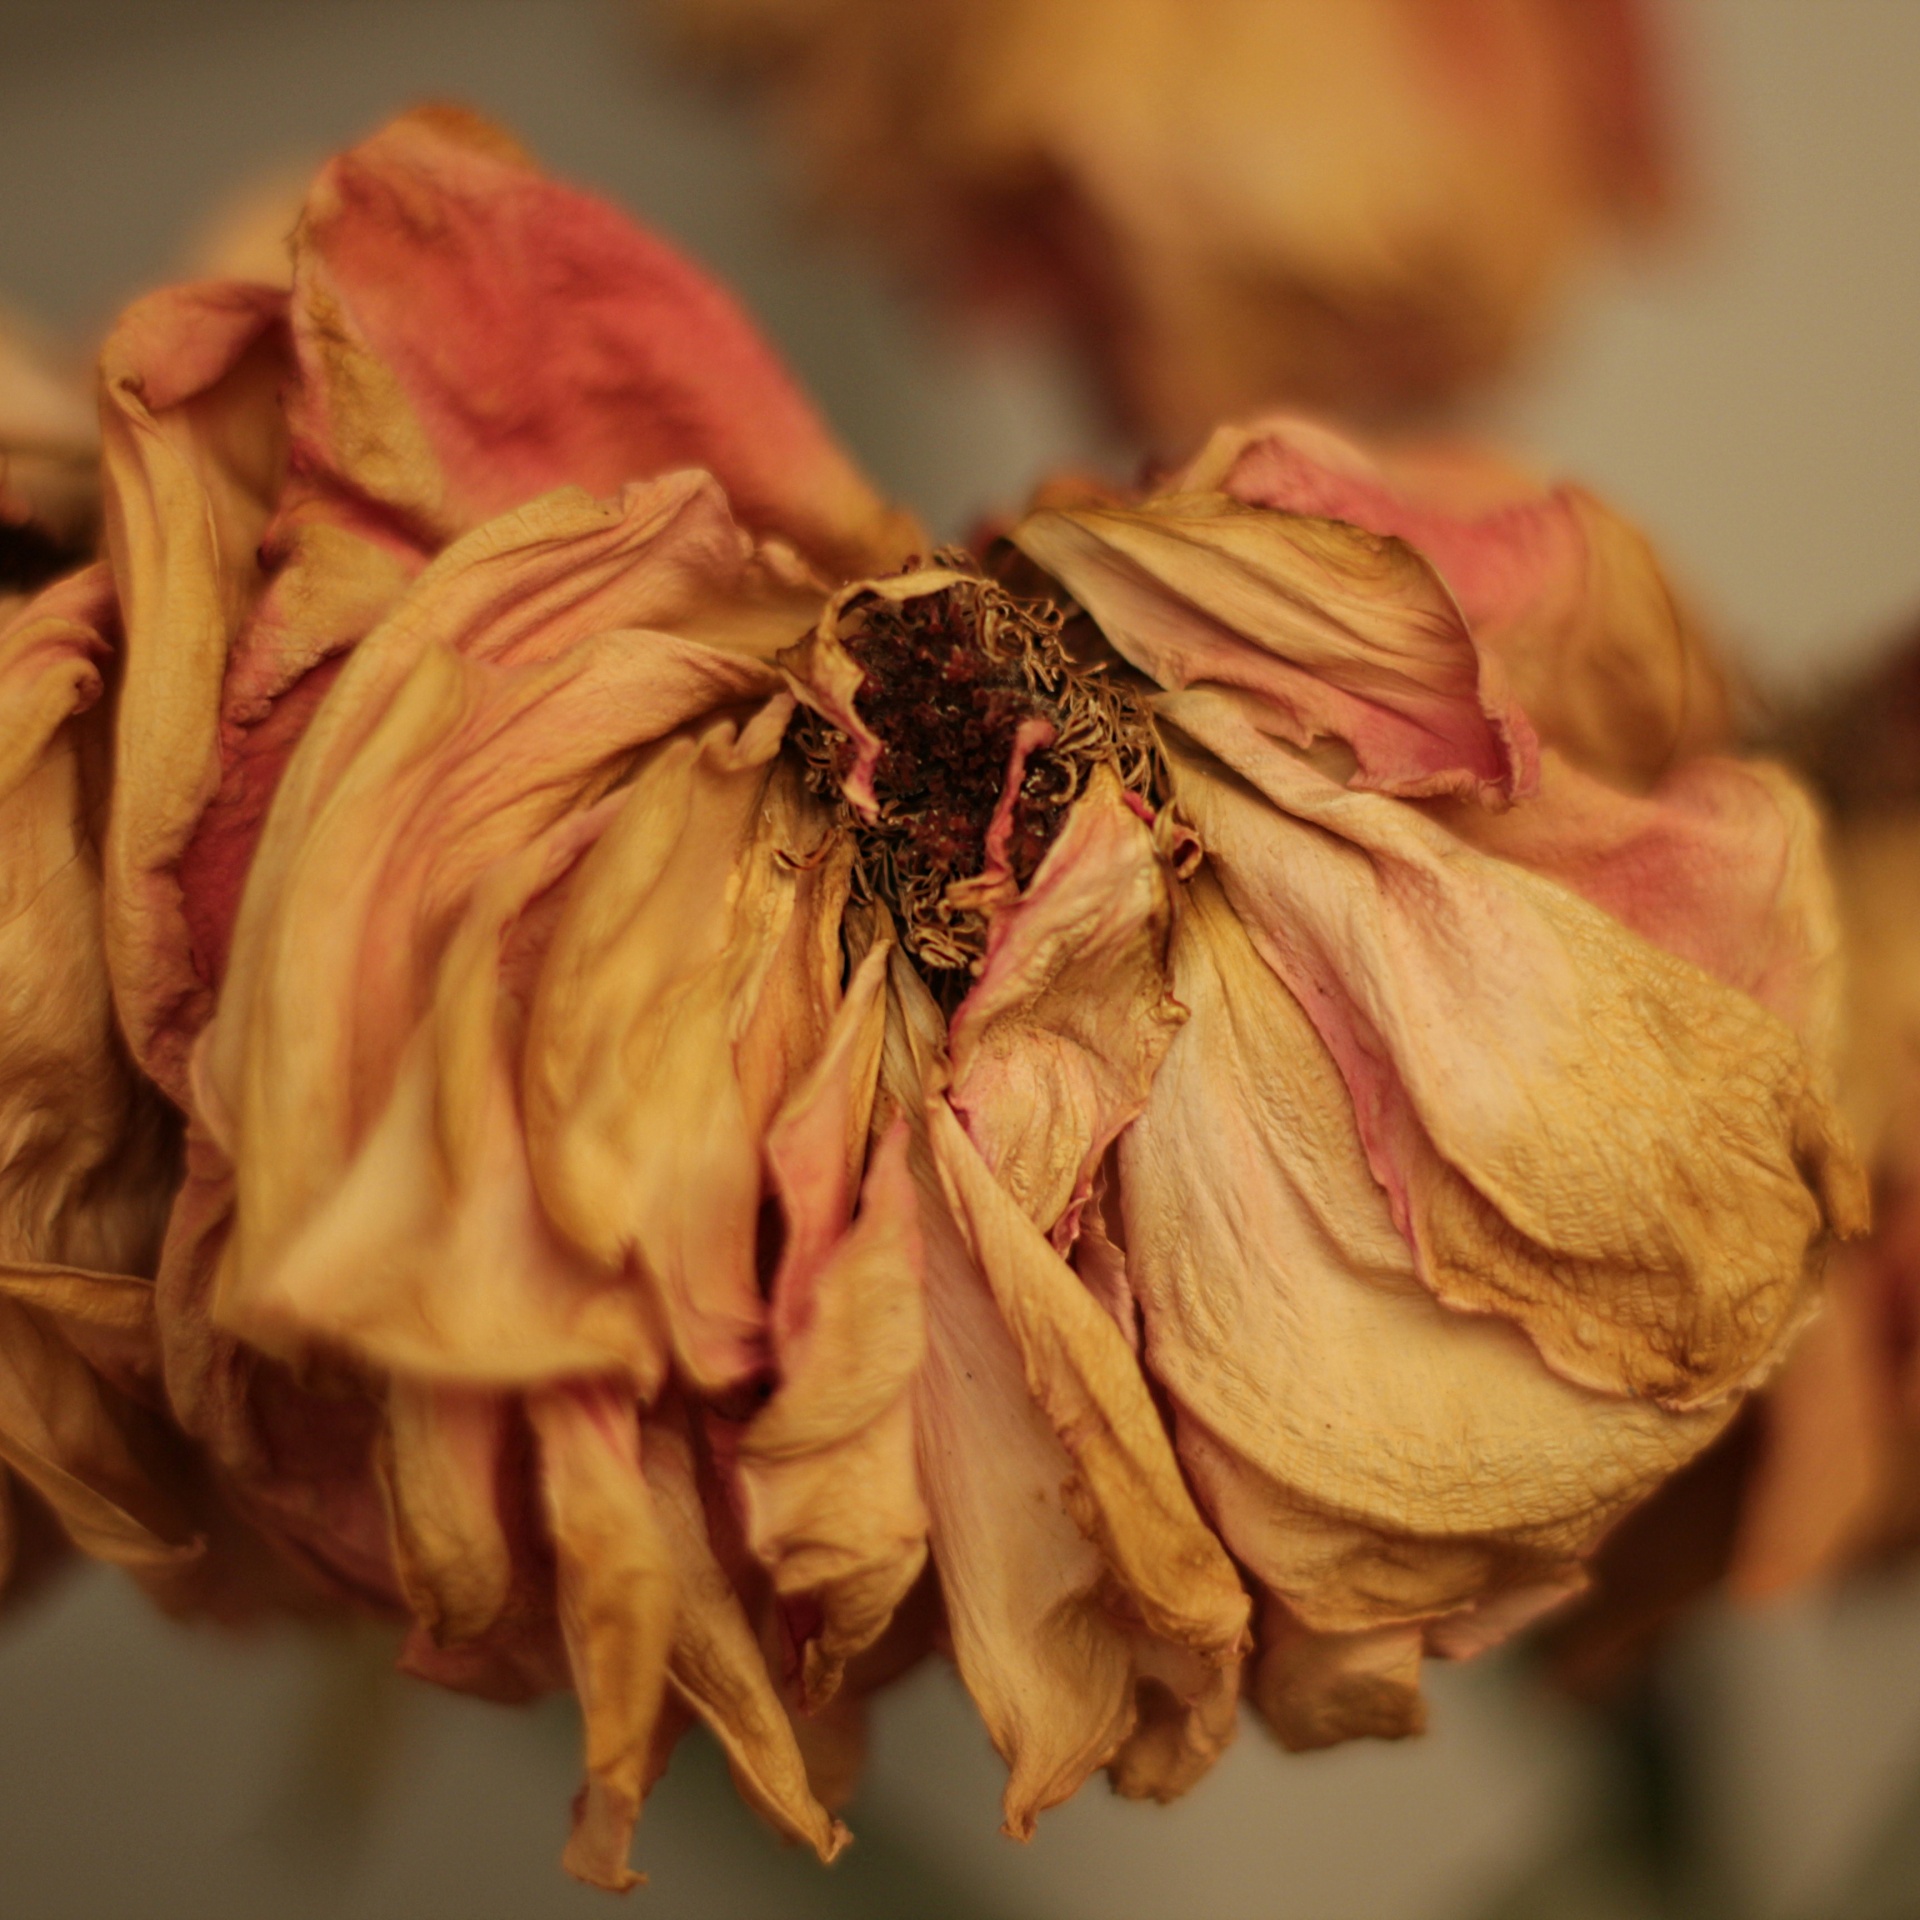 withered rose close-up free photo